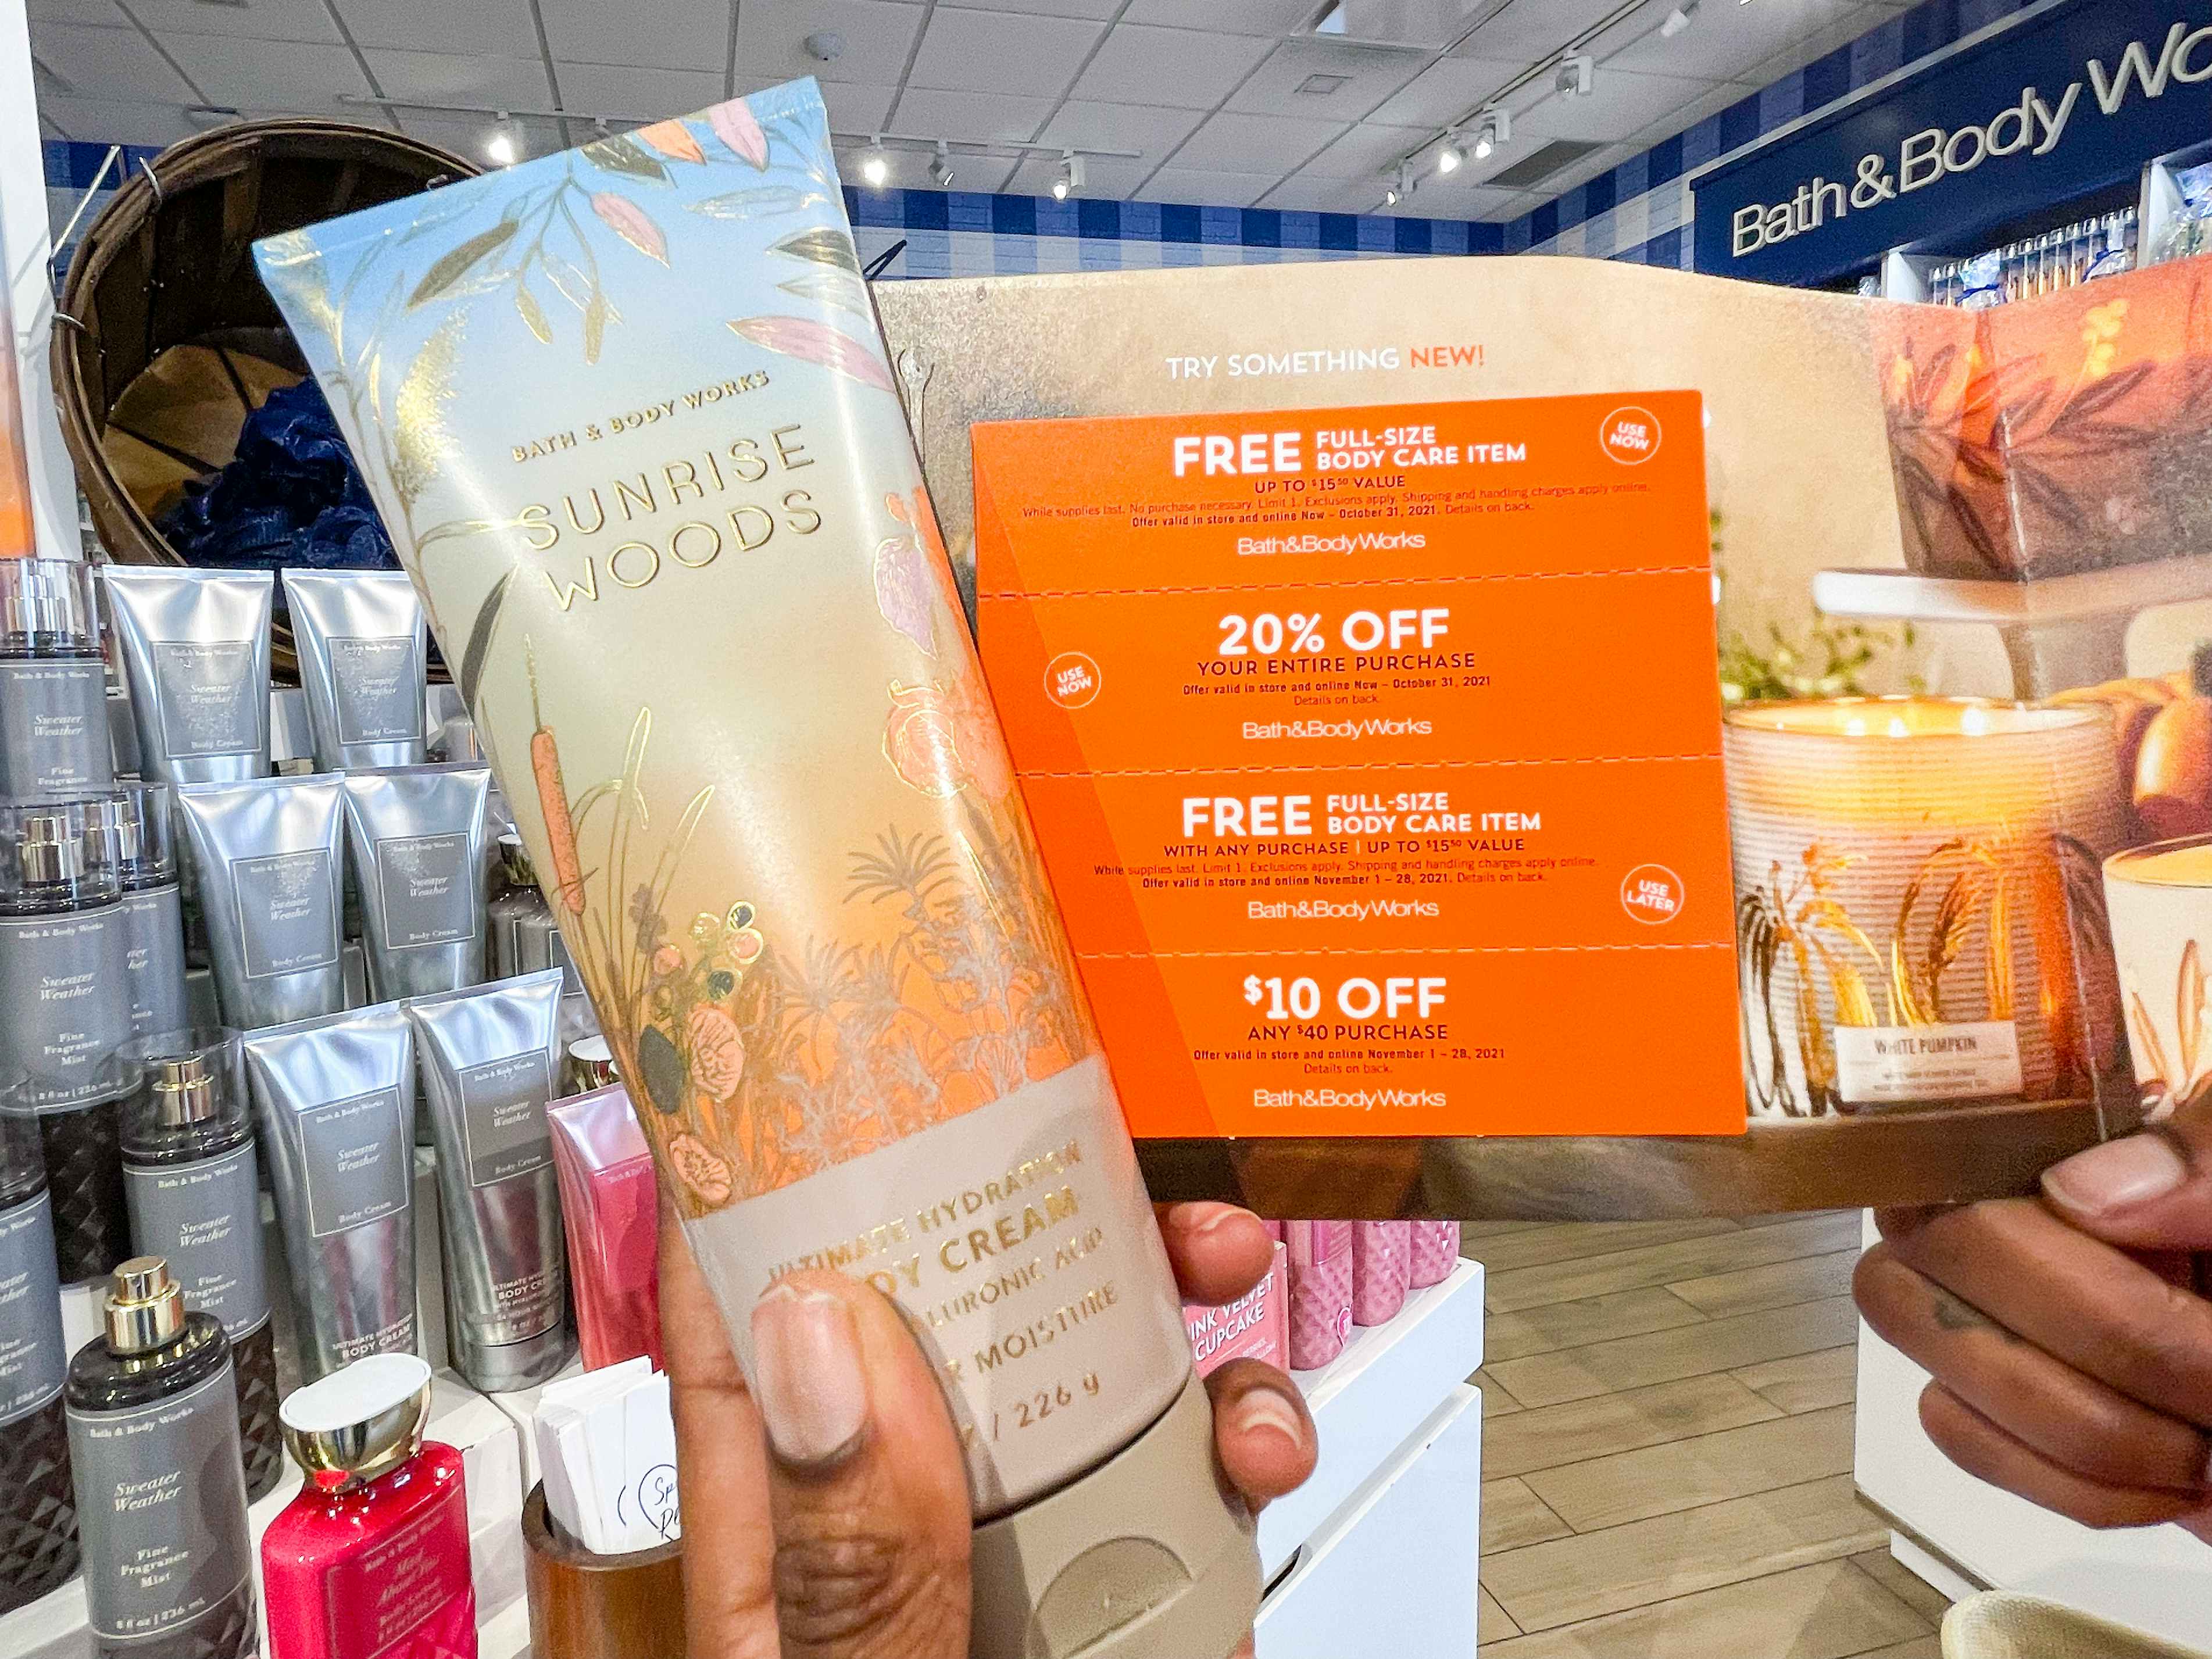 A person's hands holding a bottle of lotion and a card of coupons inside Bath & Body Works.